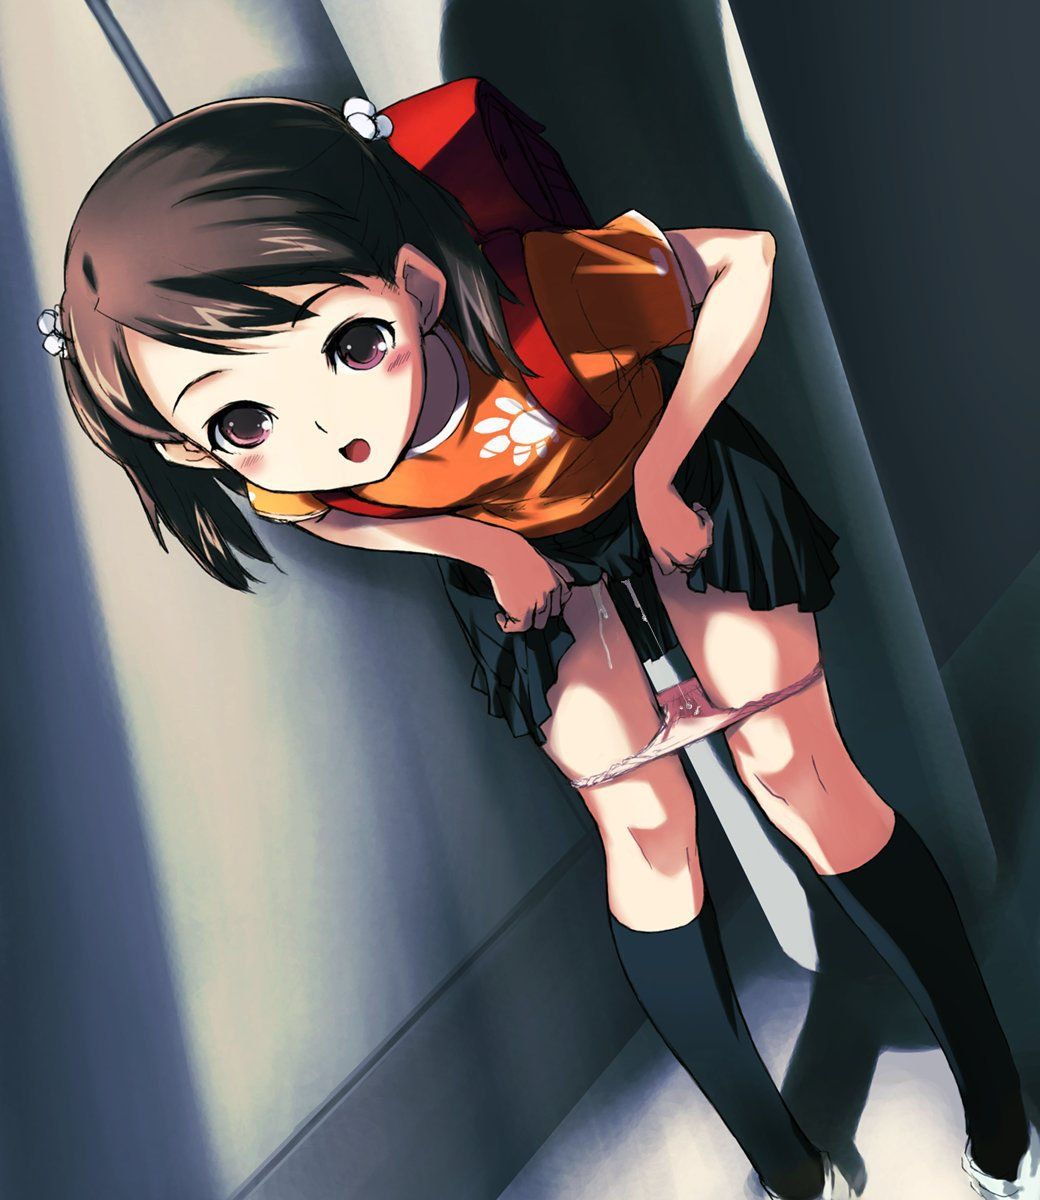 I introduce a two-dimensional erotic image of a poor loli girl to flow I am a lolicon mirror w 34